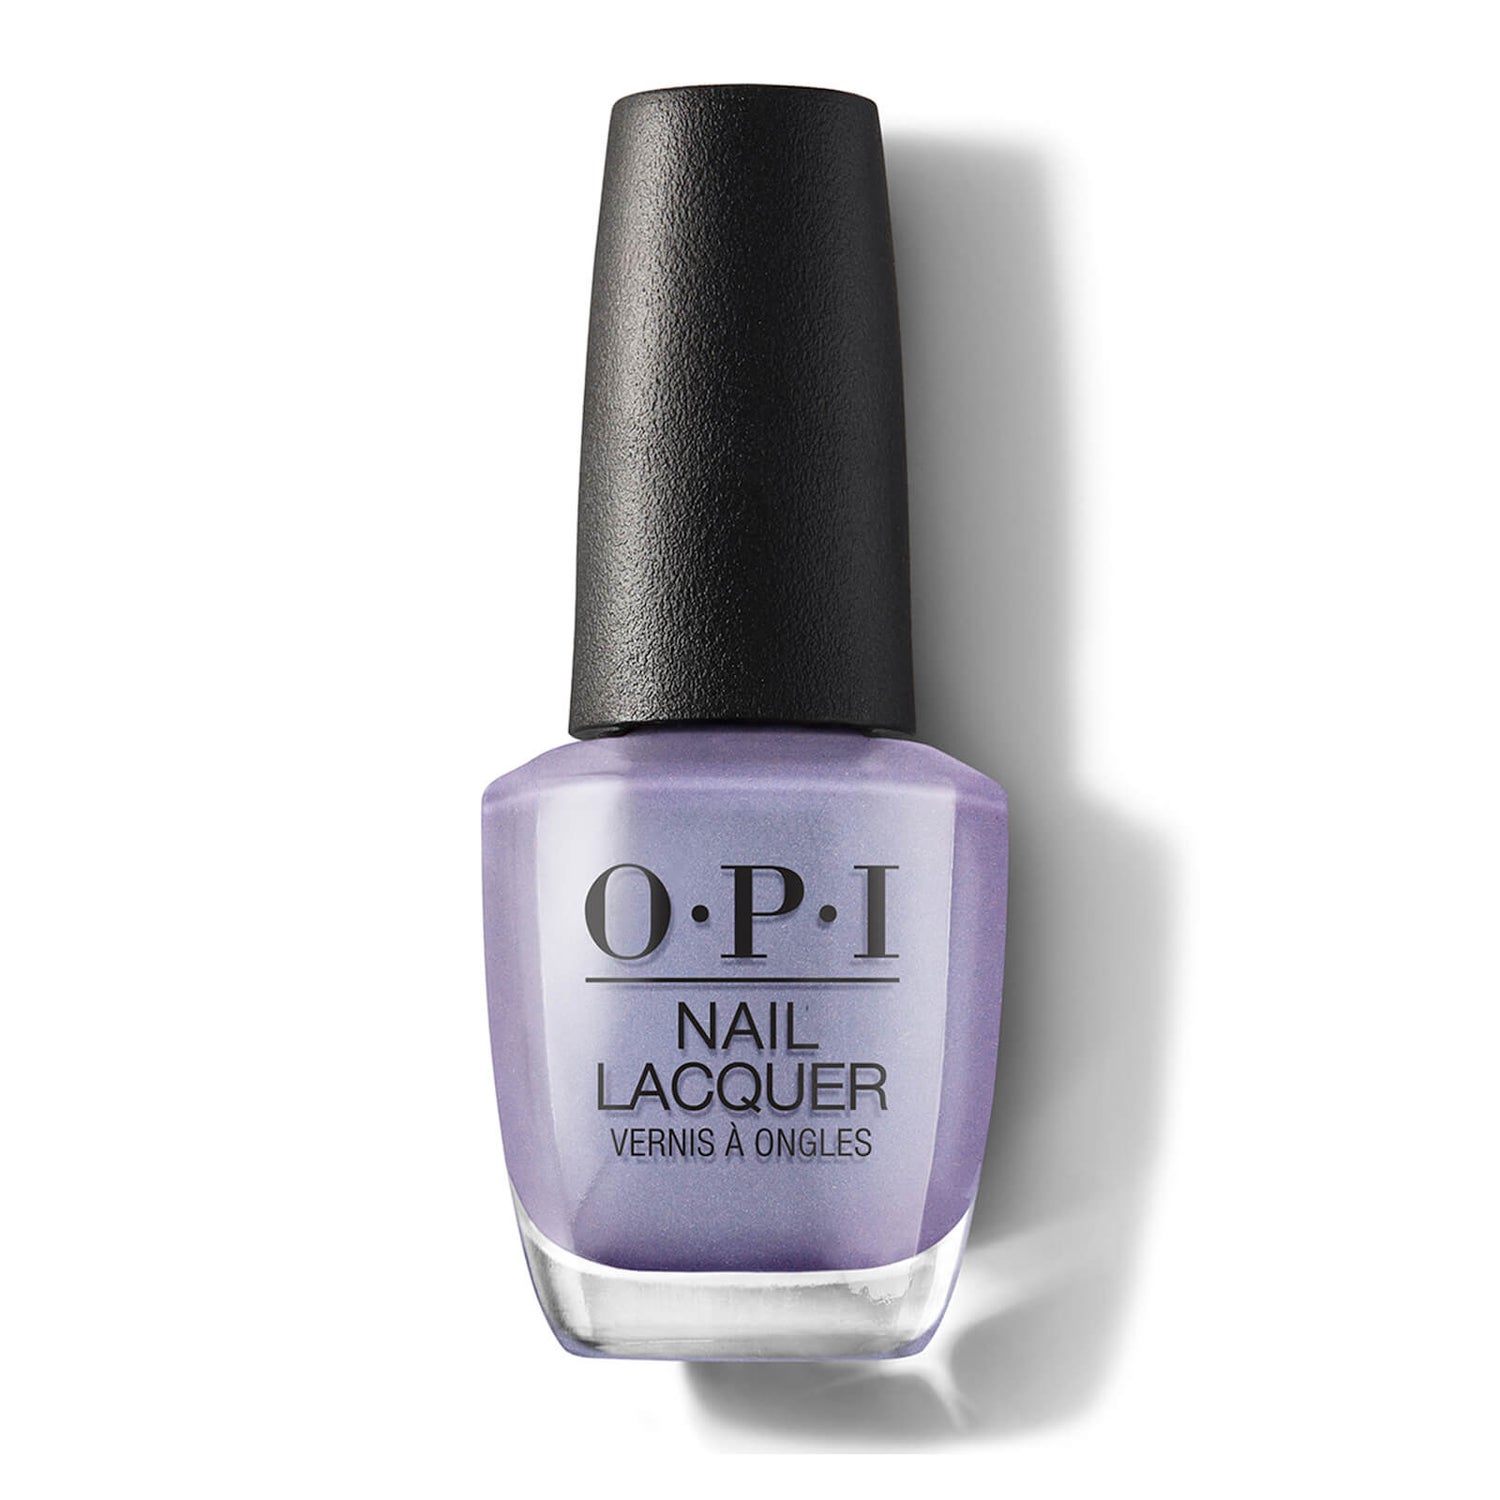 OPI Neo-Pearl Limited Edition a Hint of Pearl-ple Just a Hint of Pearl Nail Polish 15ml